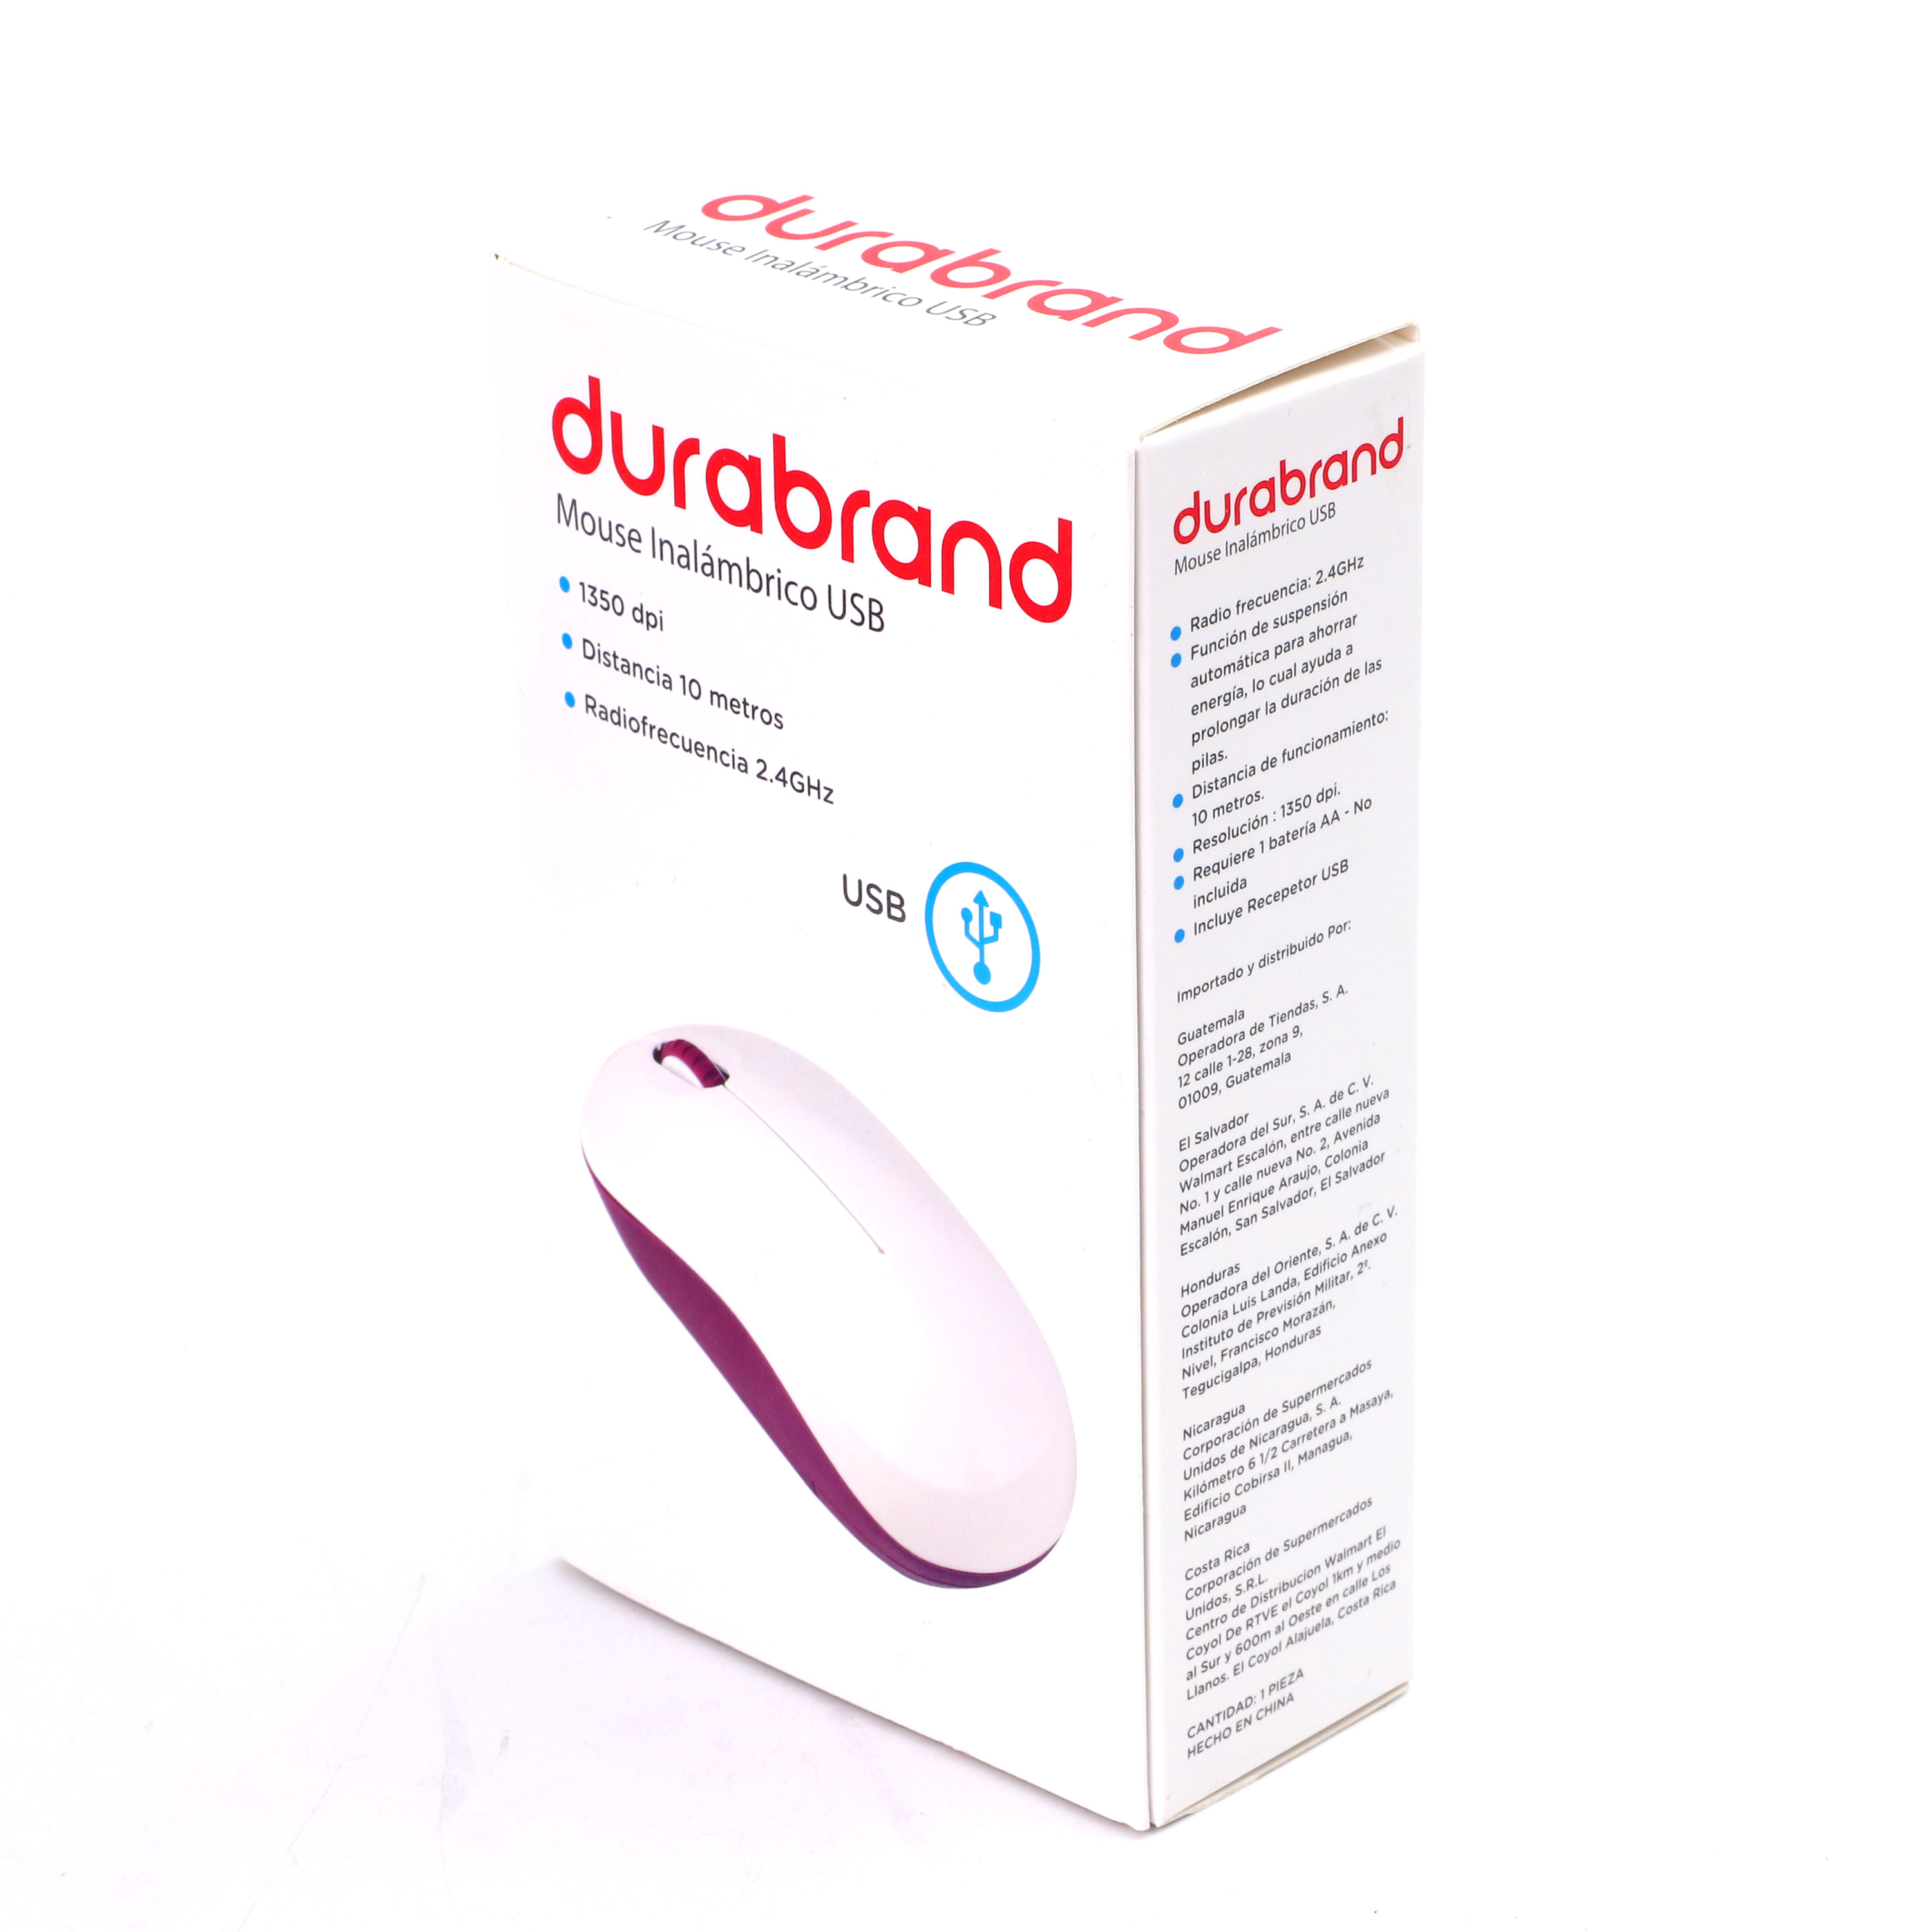 Mouse-Durabrand-Mediano-1-36364